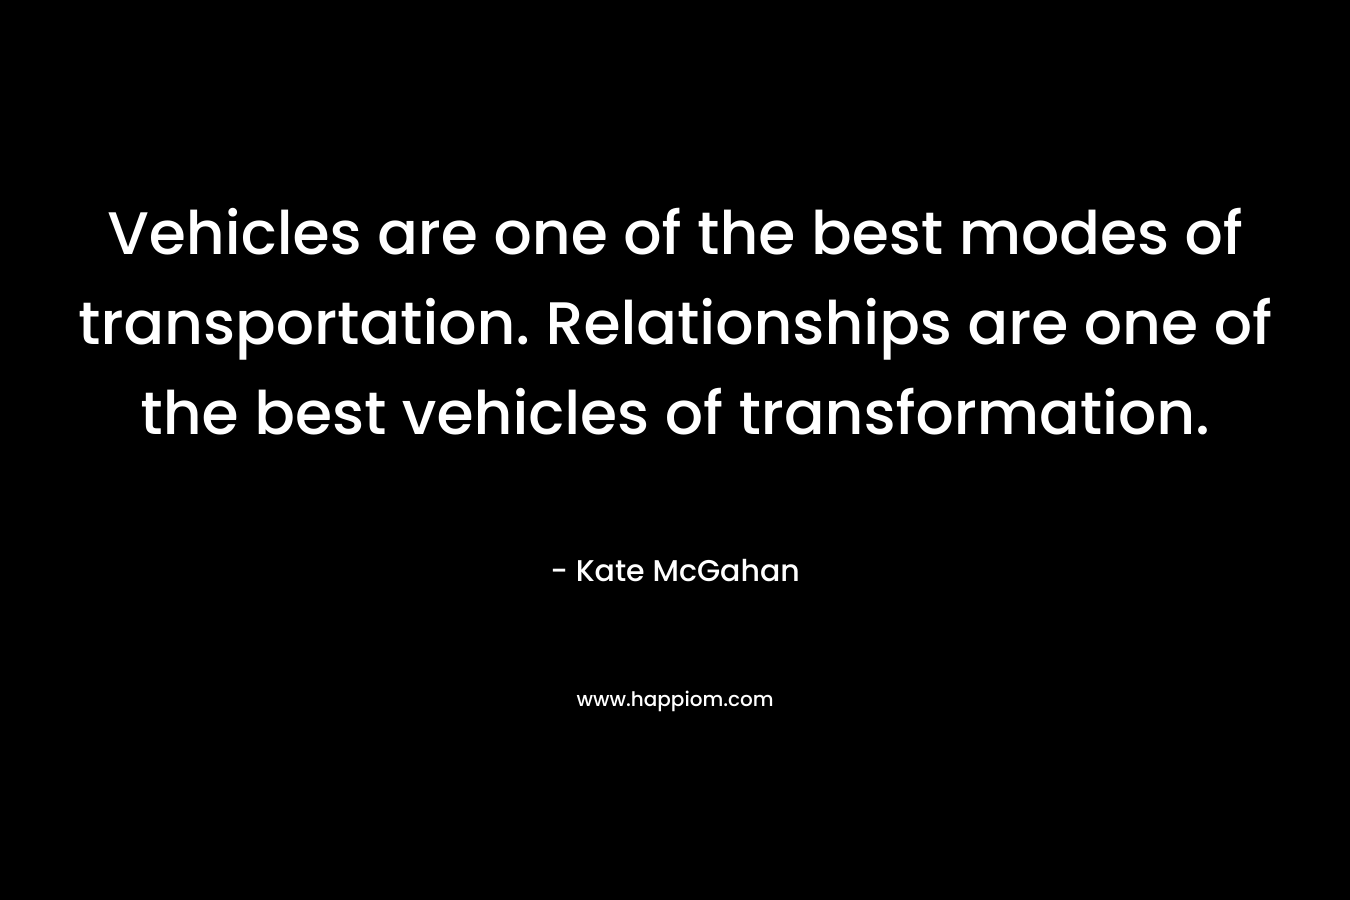 Vehicles are one of the best modes of transportation. Relationships are one of the best vehicles of transformation. – Kate McGahan